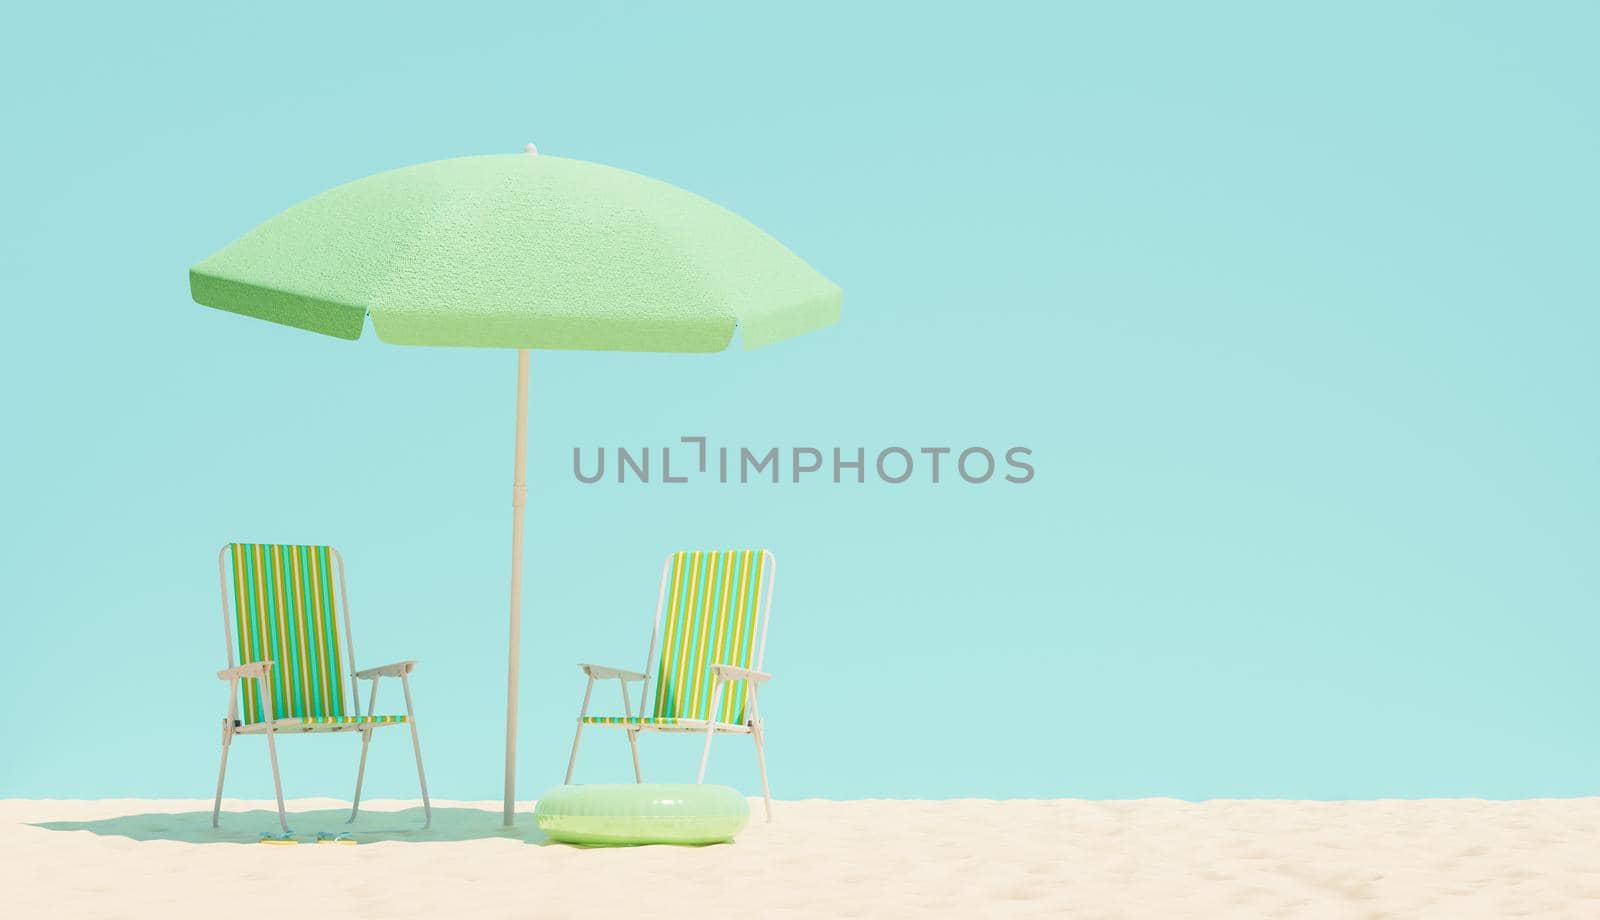 beach chairs with umbrella on sand and blue background wall. copy space. 3d render